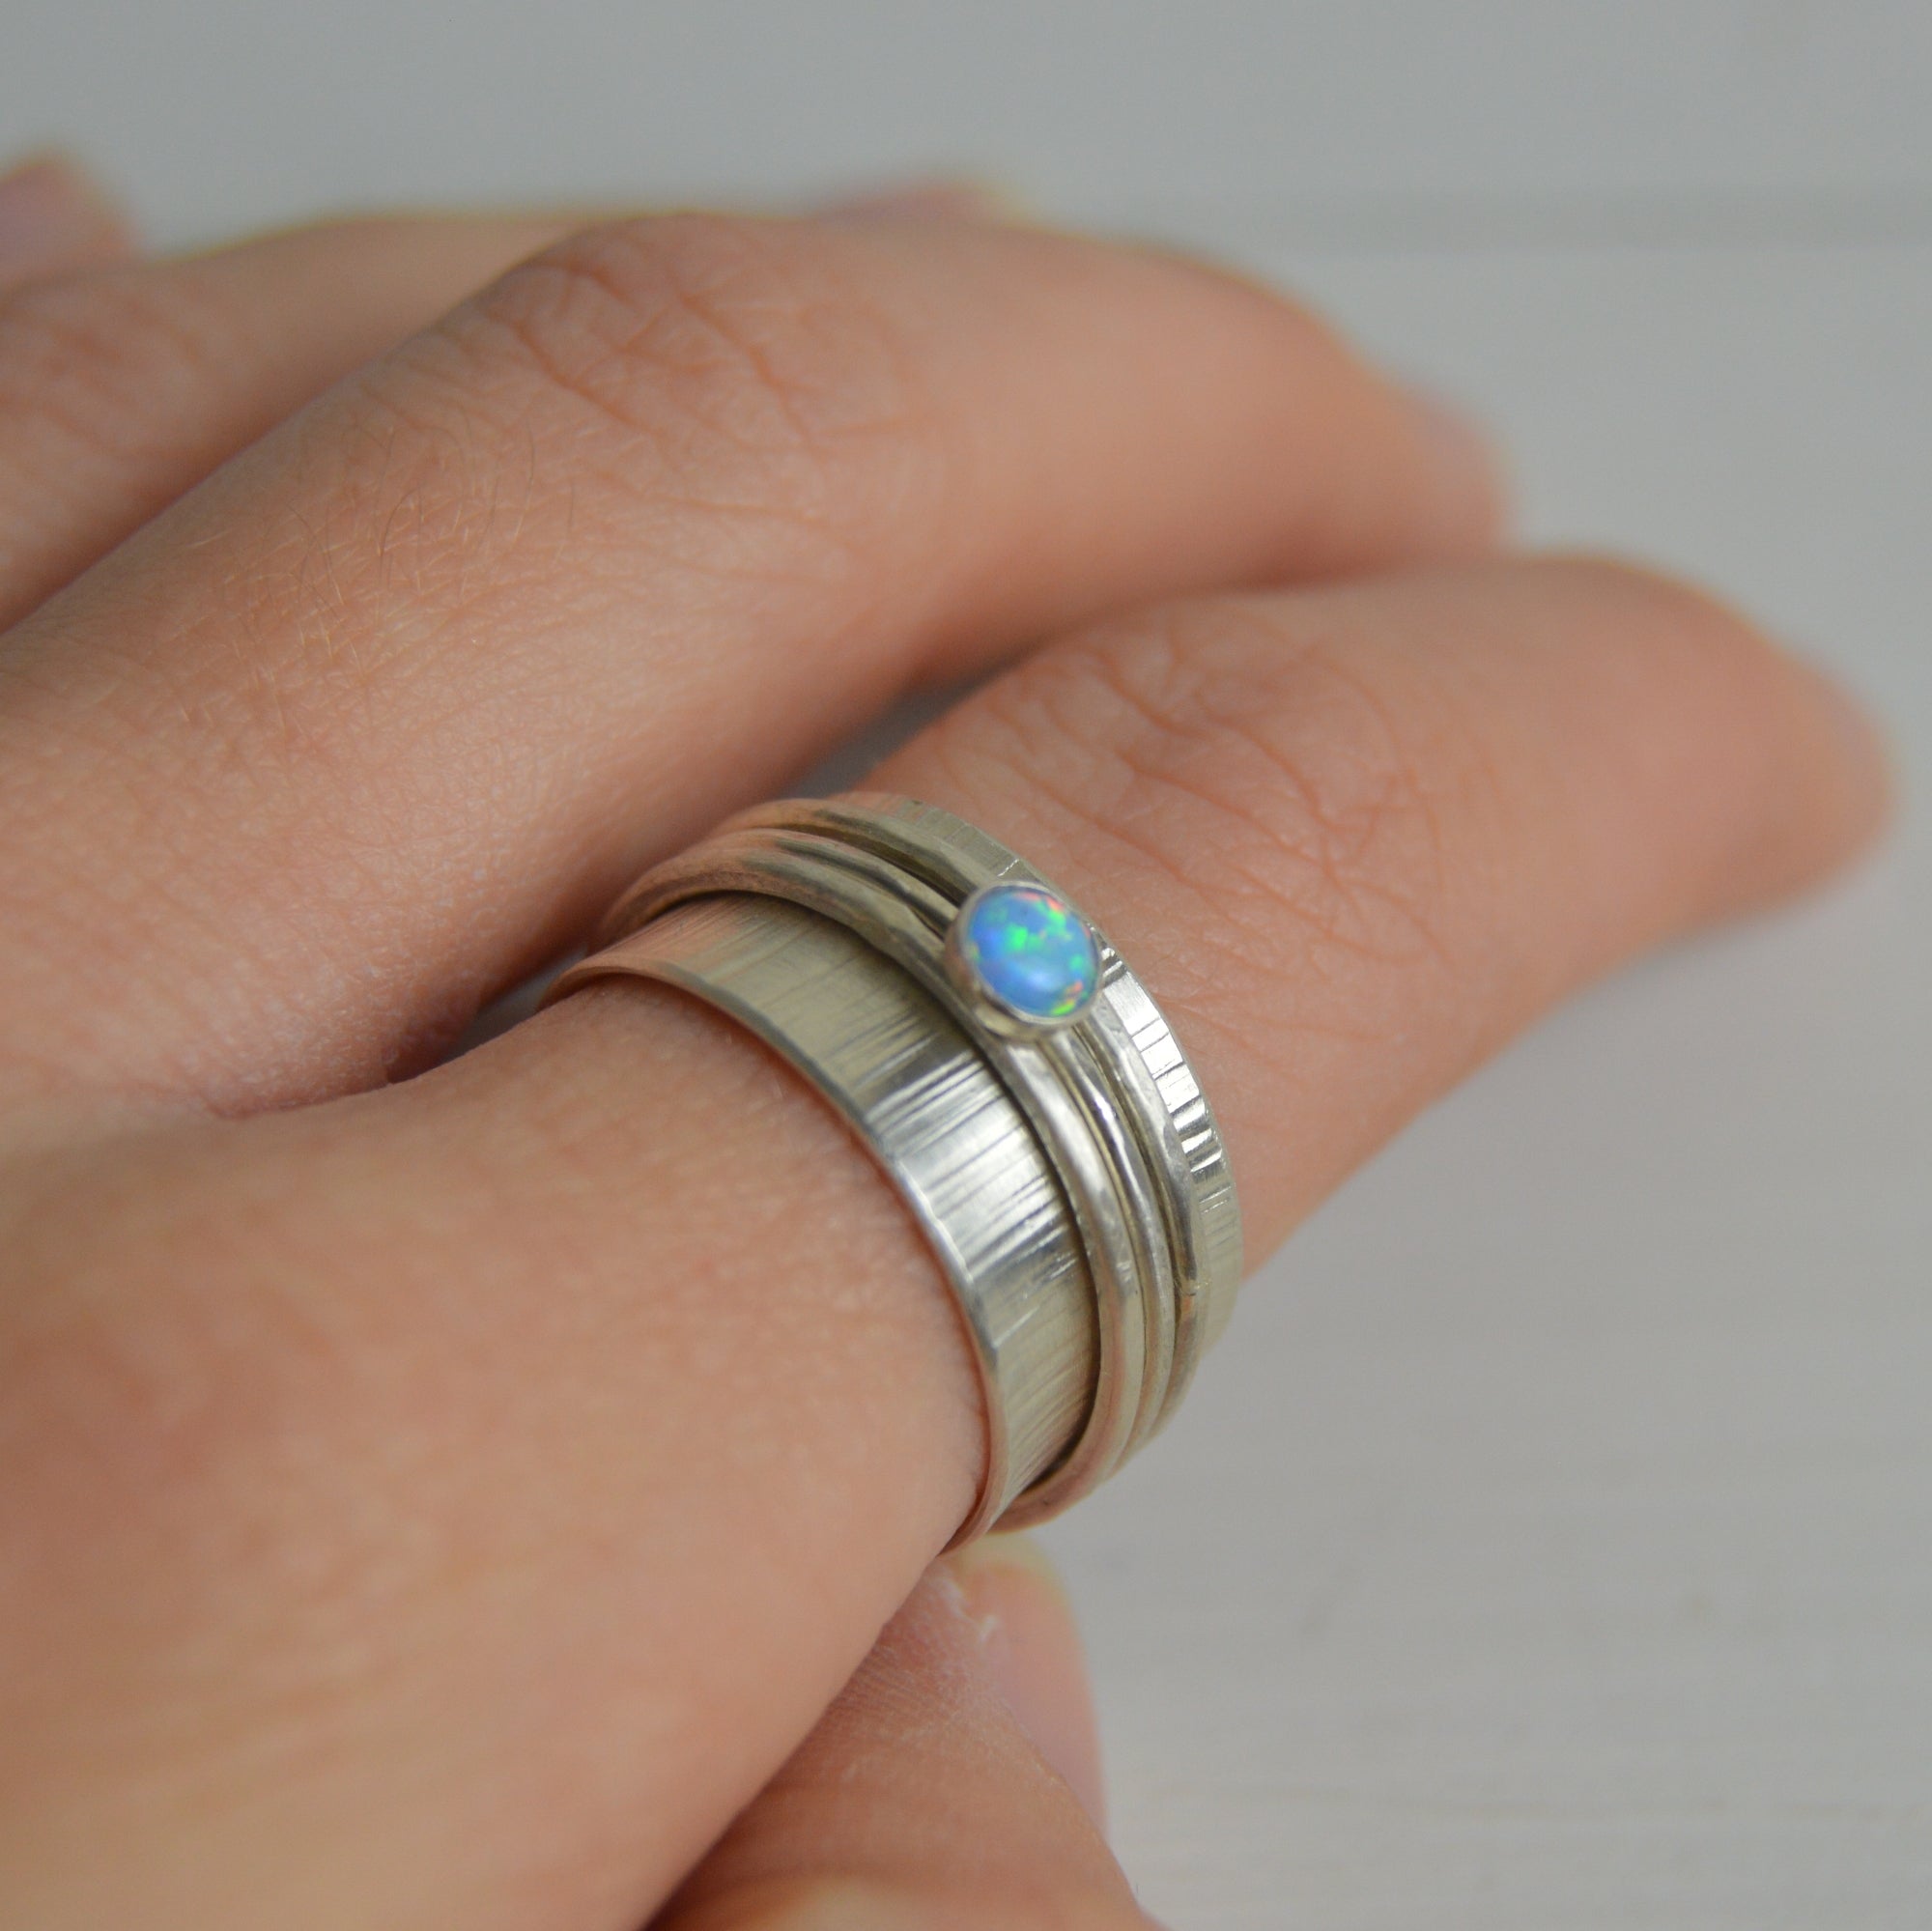 Silver Opal Spinning Ring - The Nancy Smillie Shop - Art, Jewellery & Designer Gifts Glasgow